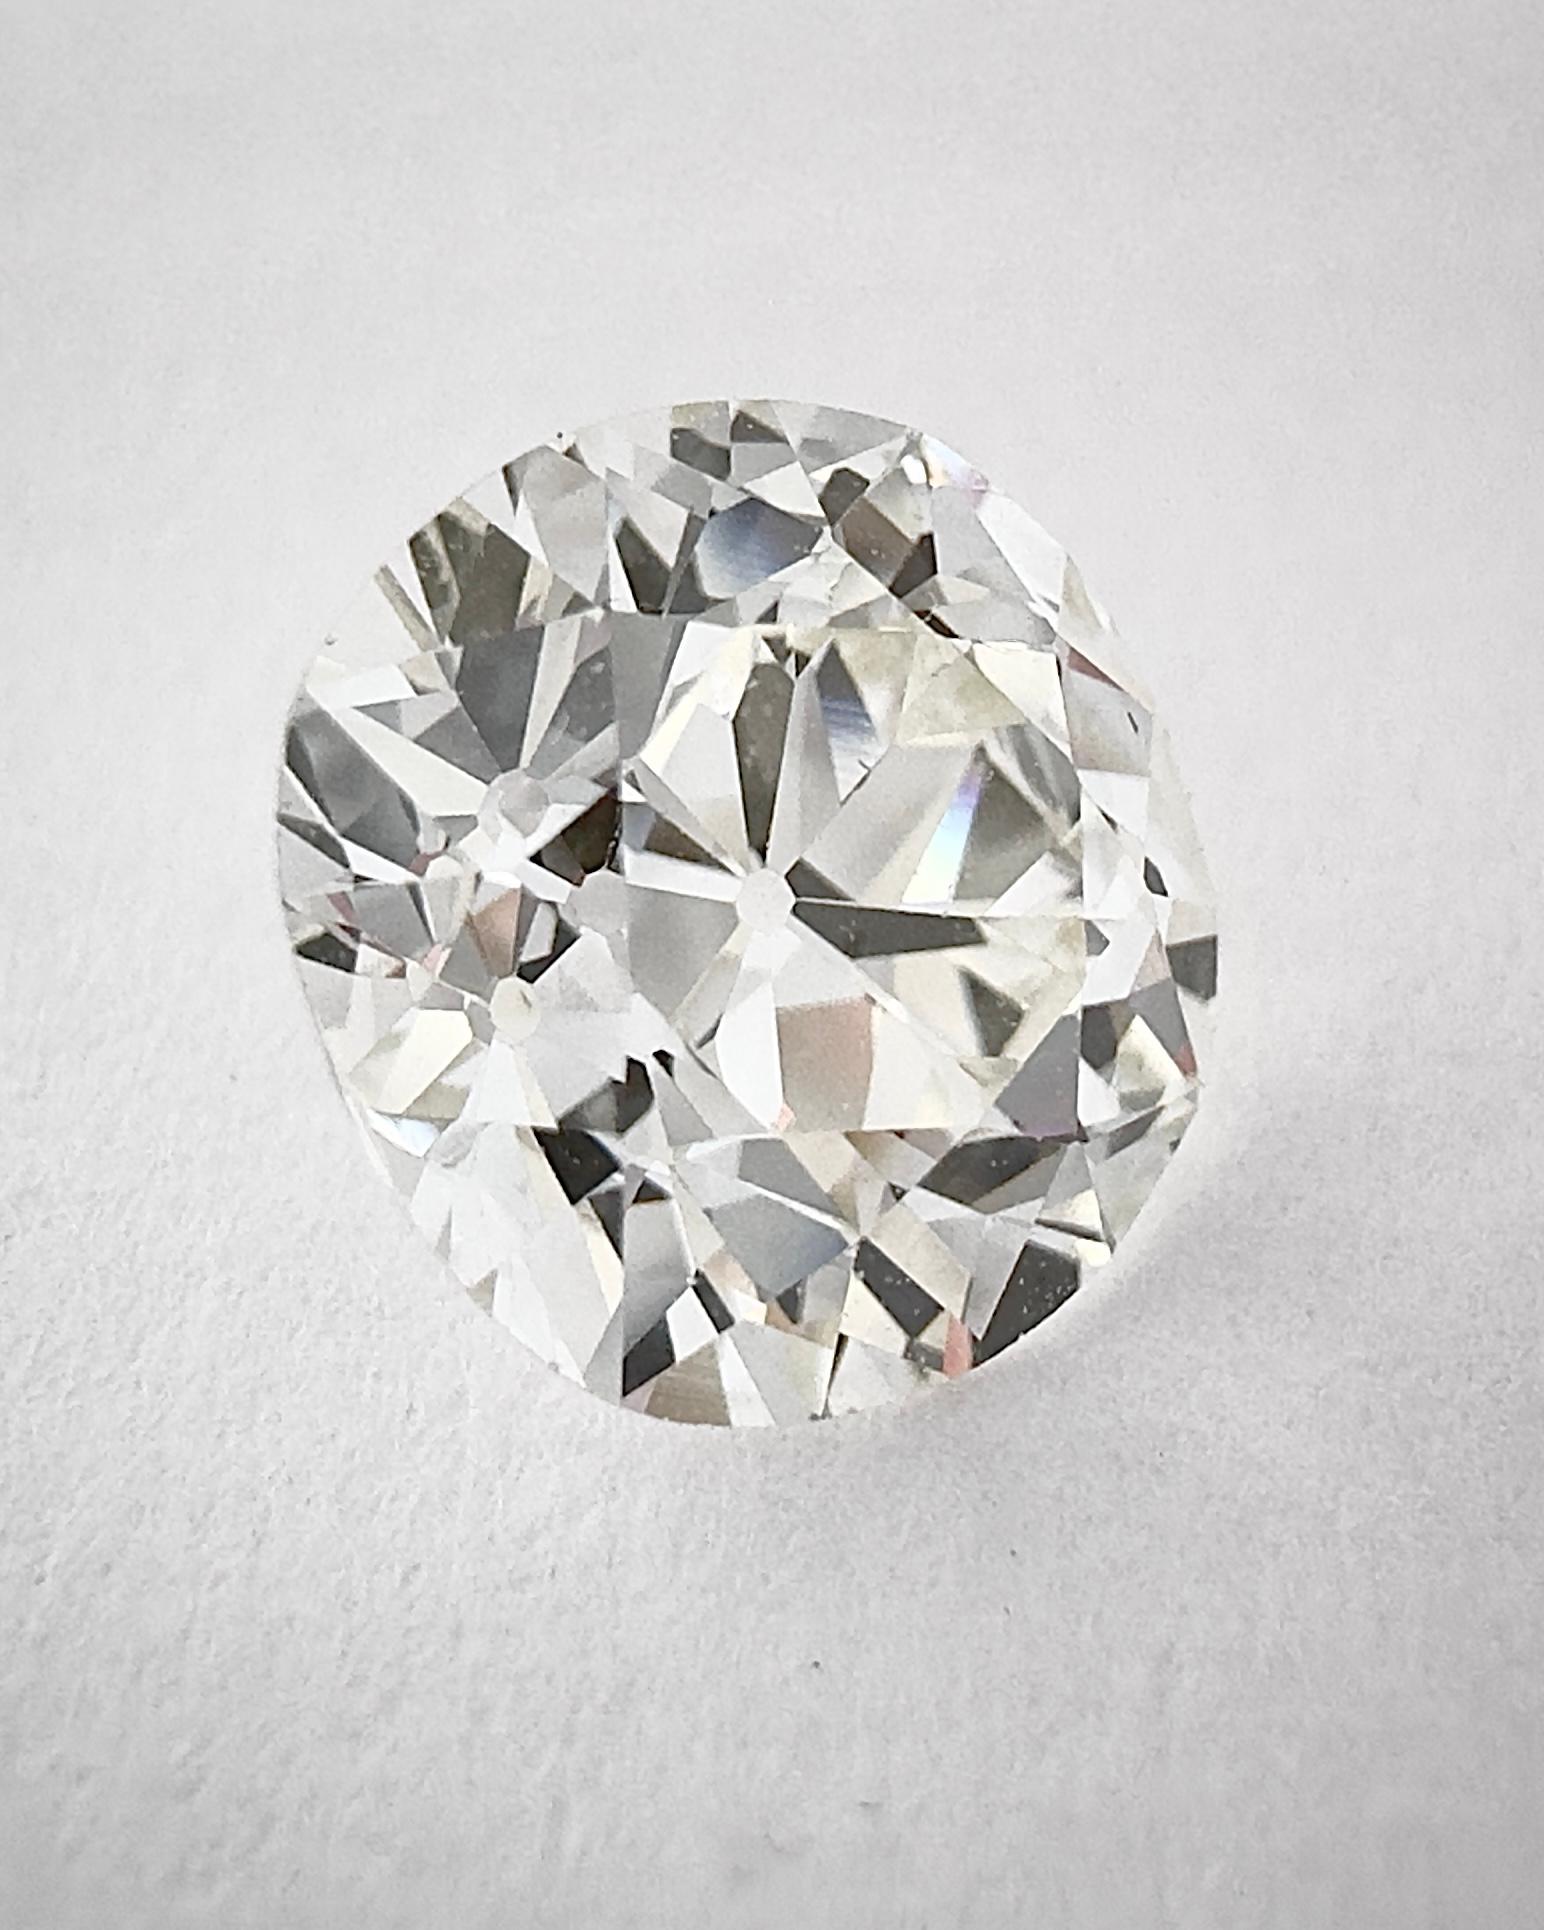 This Antique Old Mine Cushion Brilliant cut Diamond weights 2.12 carats with a J color (Beautiful white face up) and VVS2 Clarity (Loupe Clean).
The high quality of its cut let the stone reveal an incredible brightness.
What is interested with